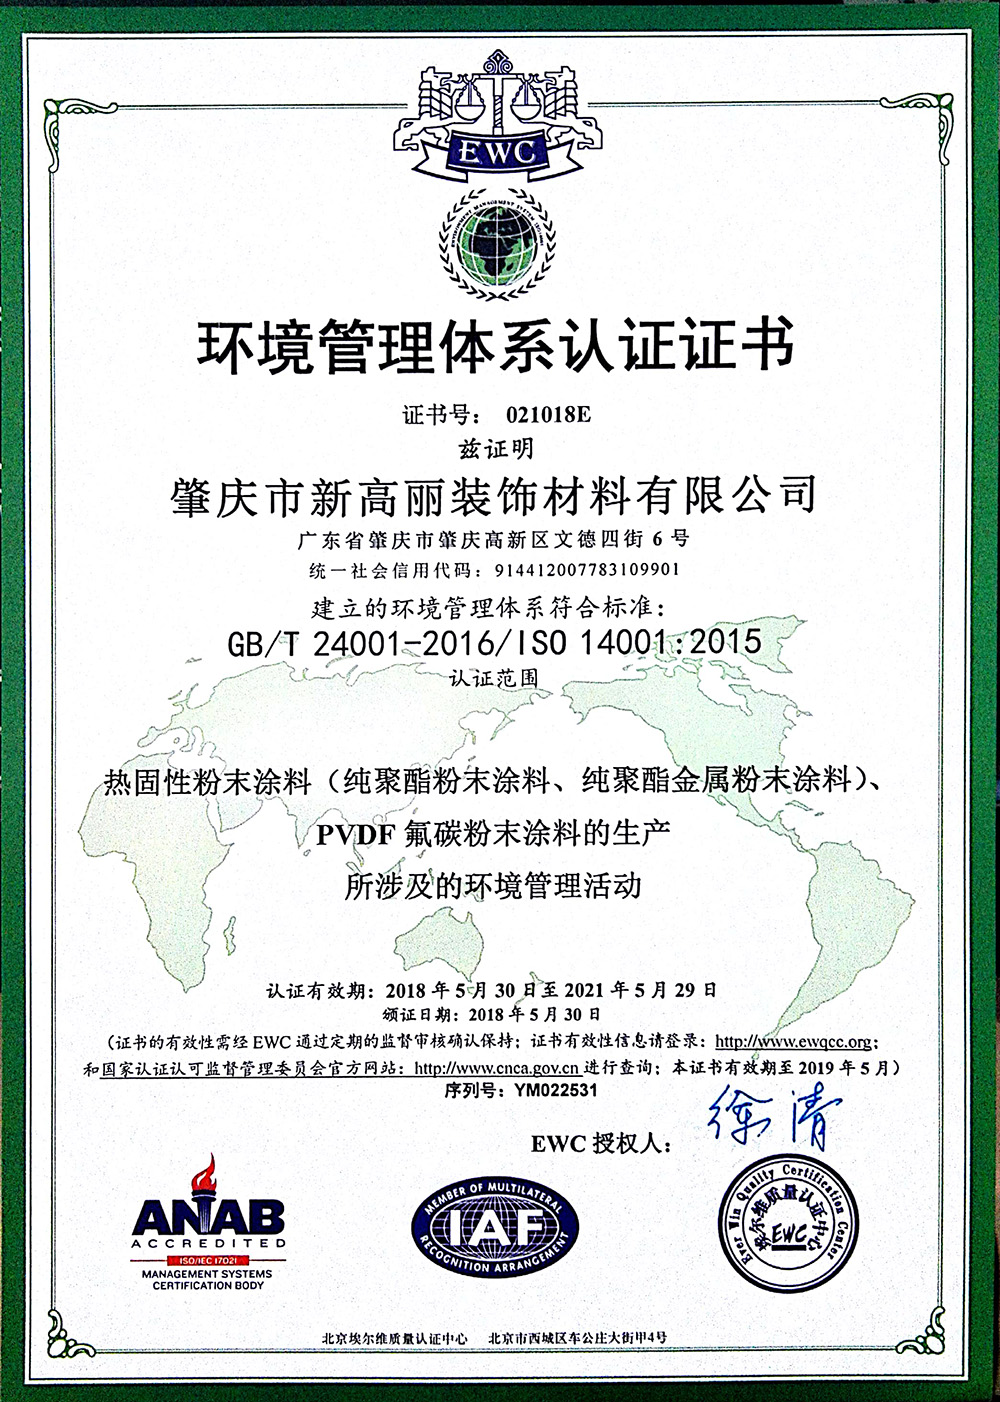 Zhaoqing KGE - Environment Management System Certification (18-21)